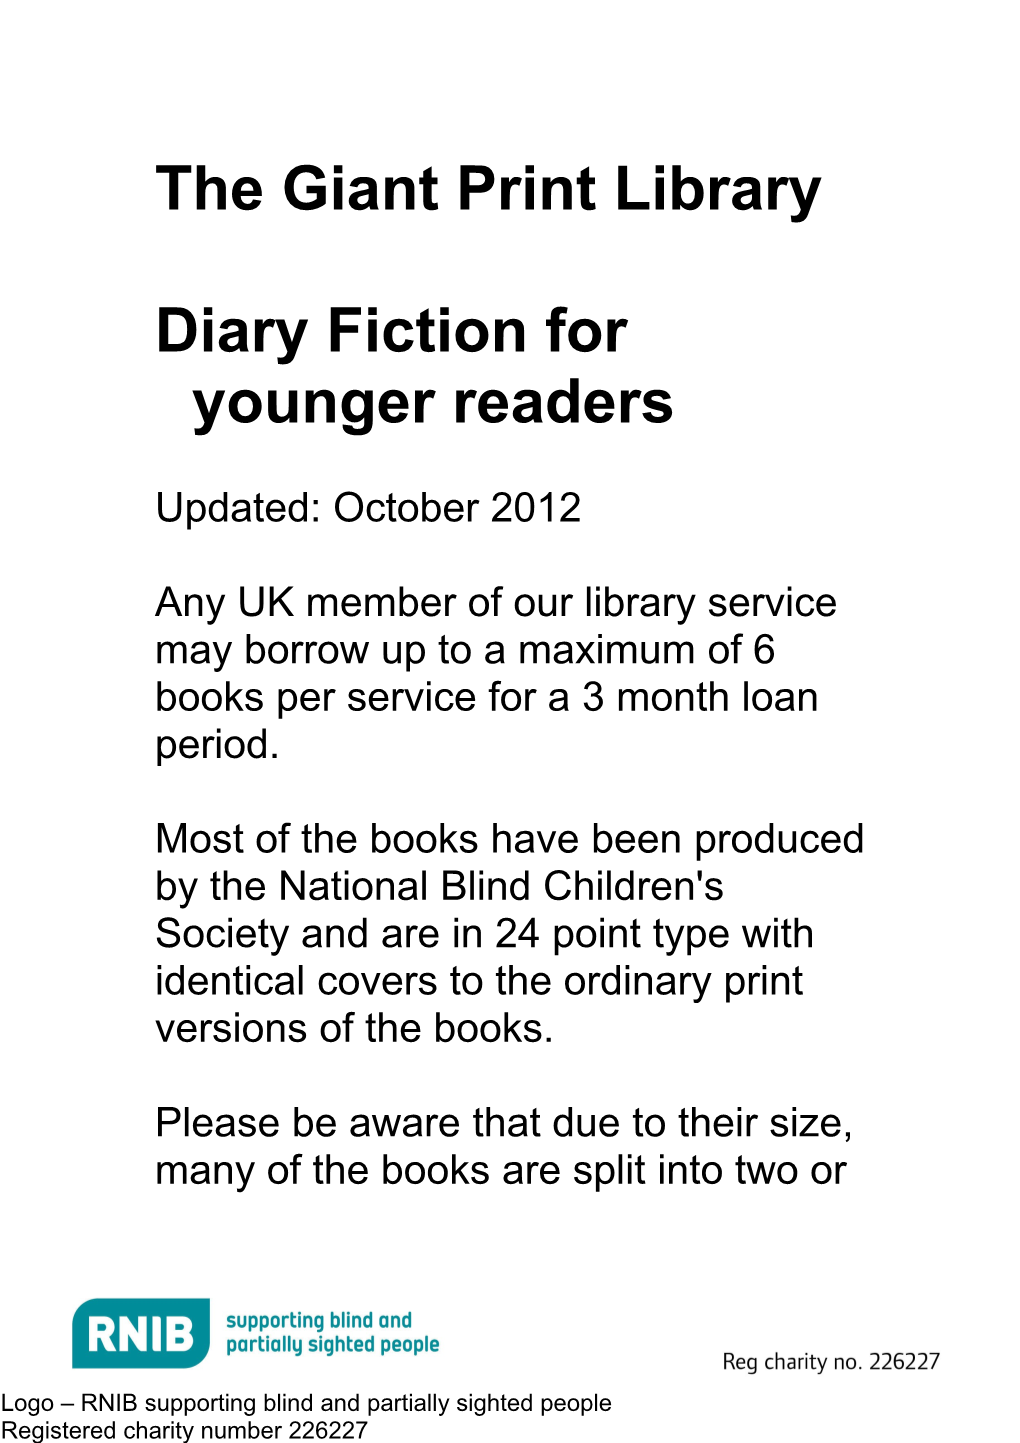 Diary Fiction for Younger Readers in Giant Print (Word, 200KB)